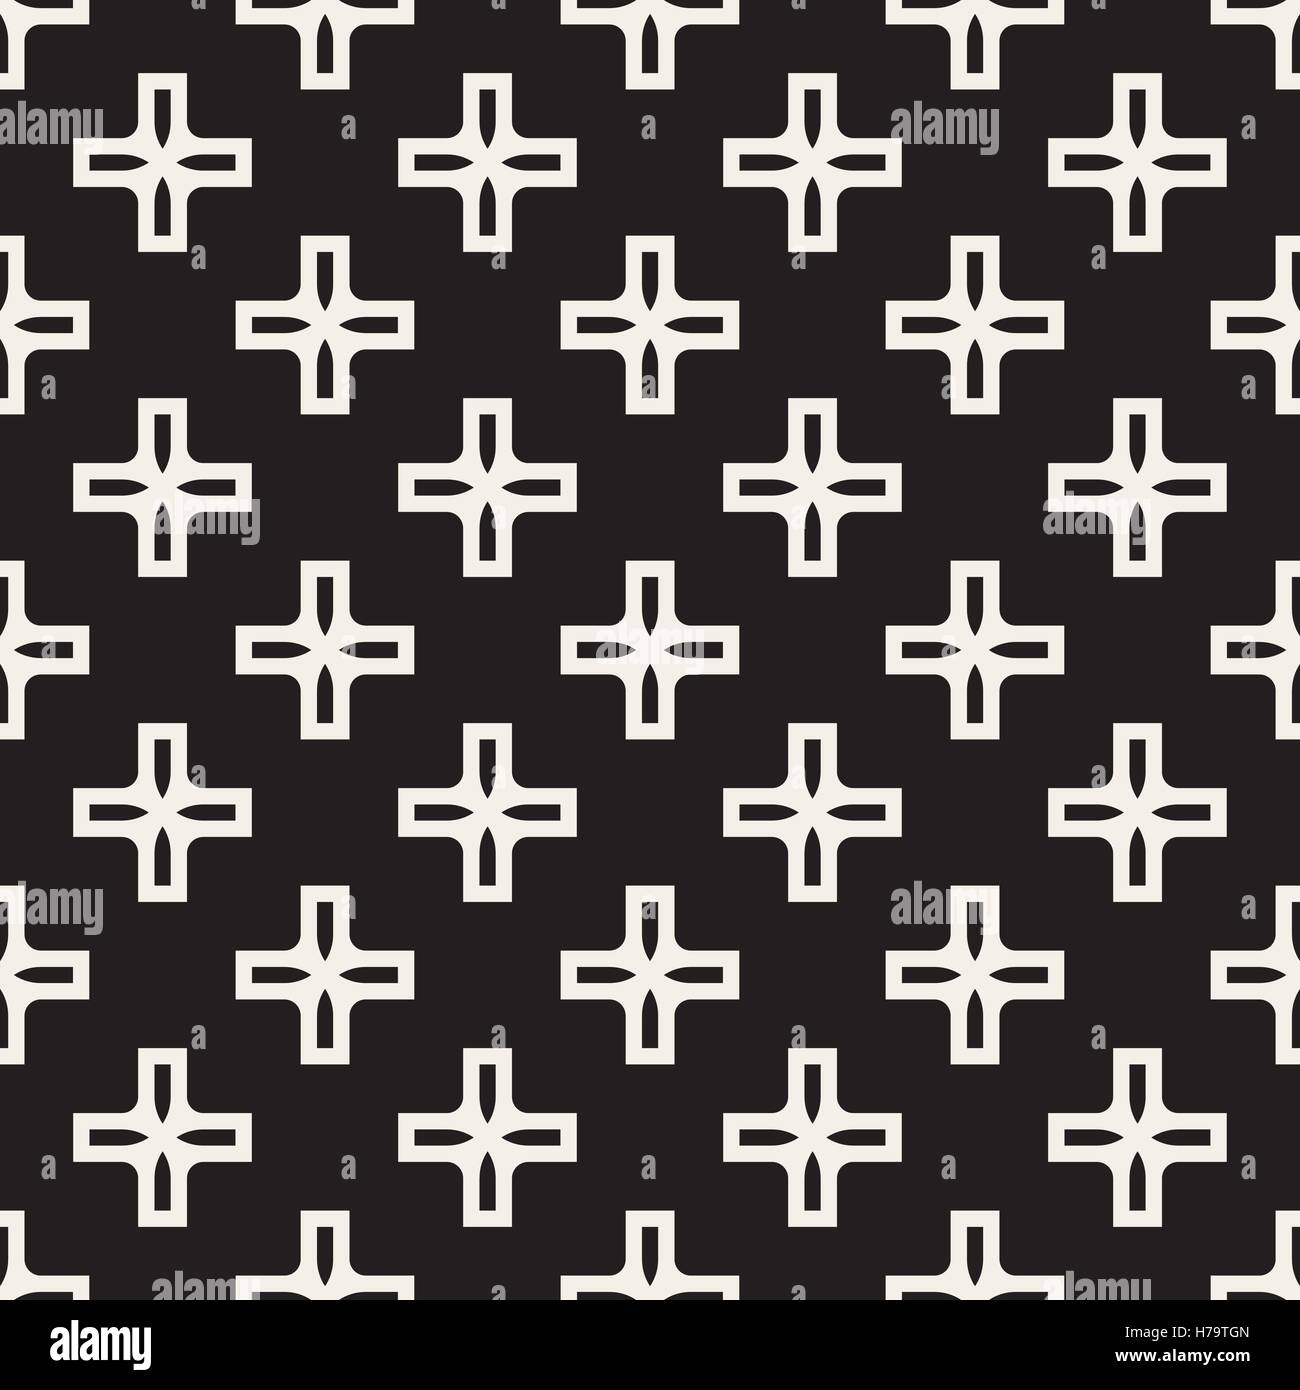 Vector Seamless Black And White Simple Cross Square Pattern Stock Vector